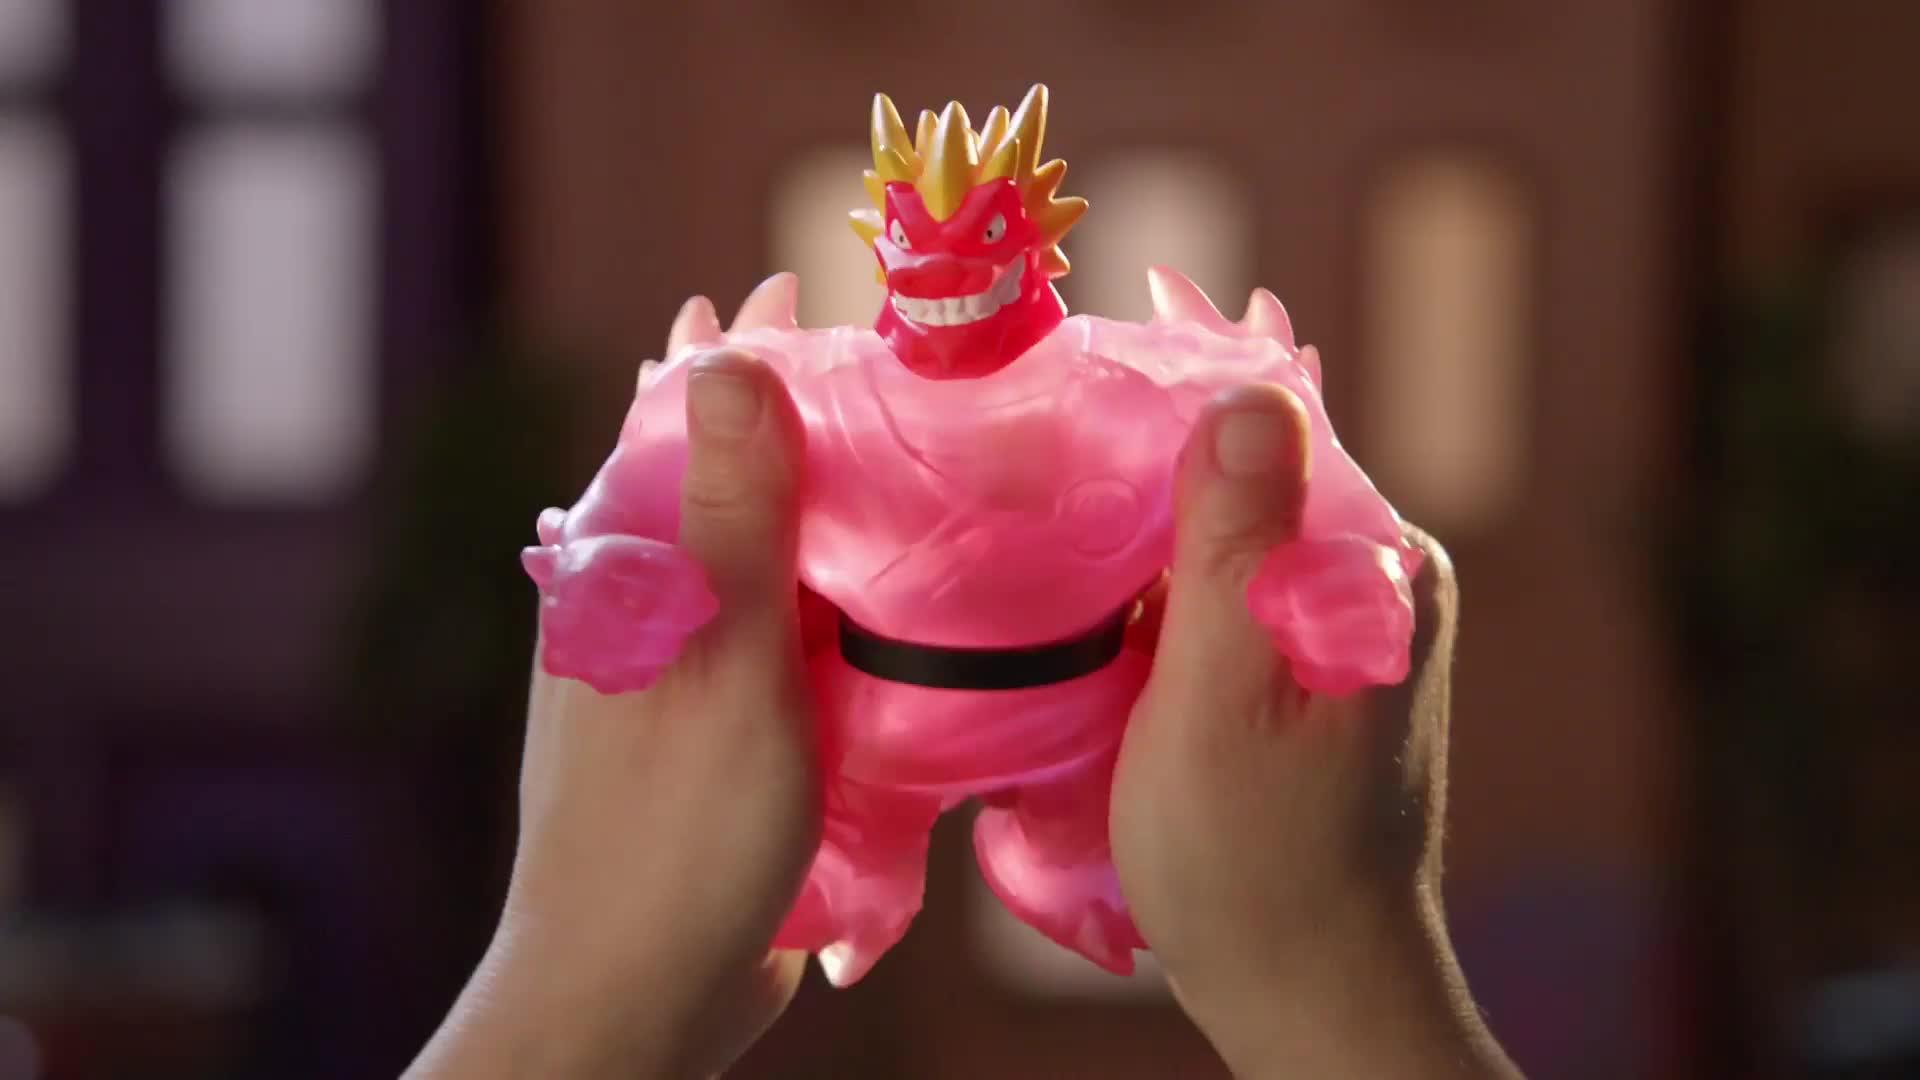 Heroes Of Goo Jit Zu Glow Shifters Hero, Super Gooey Tyro Hero Goo Filled  Toy with a unique Glowing Goo Transformation. Crush the core and see the Goo  Glow in the Dark!